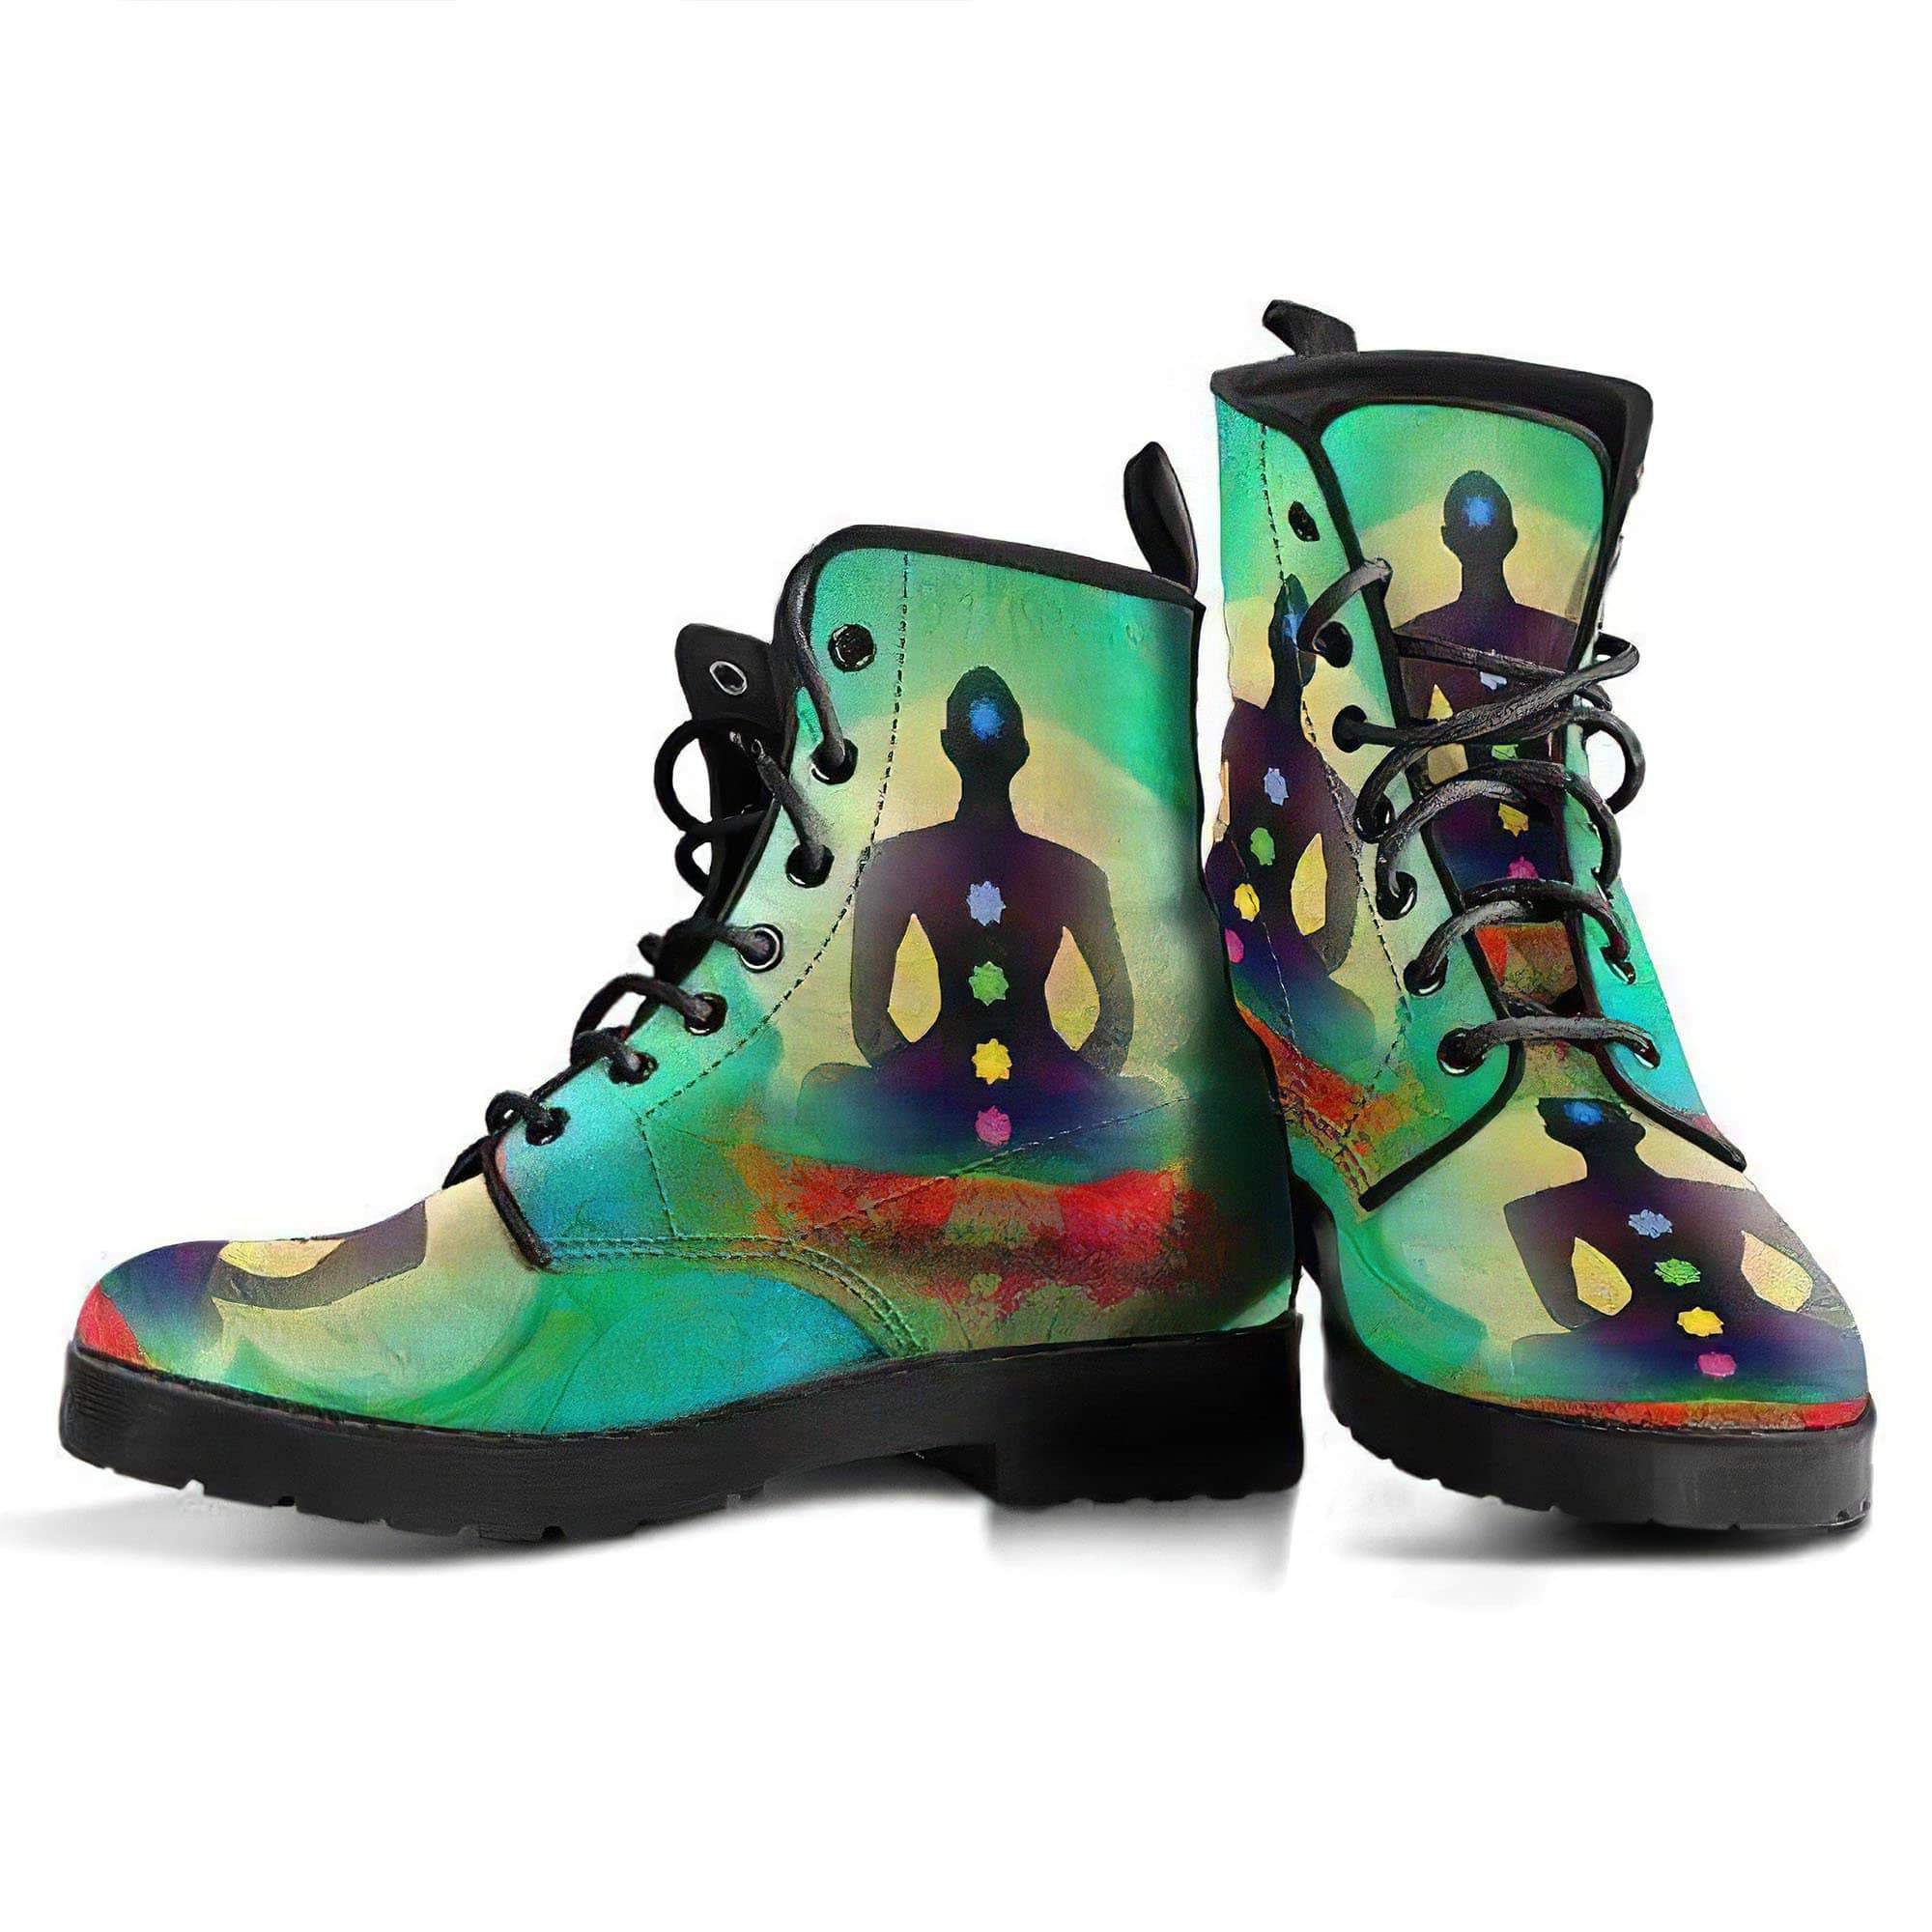 yoga-mandala-handcrafted-boots-women-s-leather-boots-12051987234877.jpg